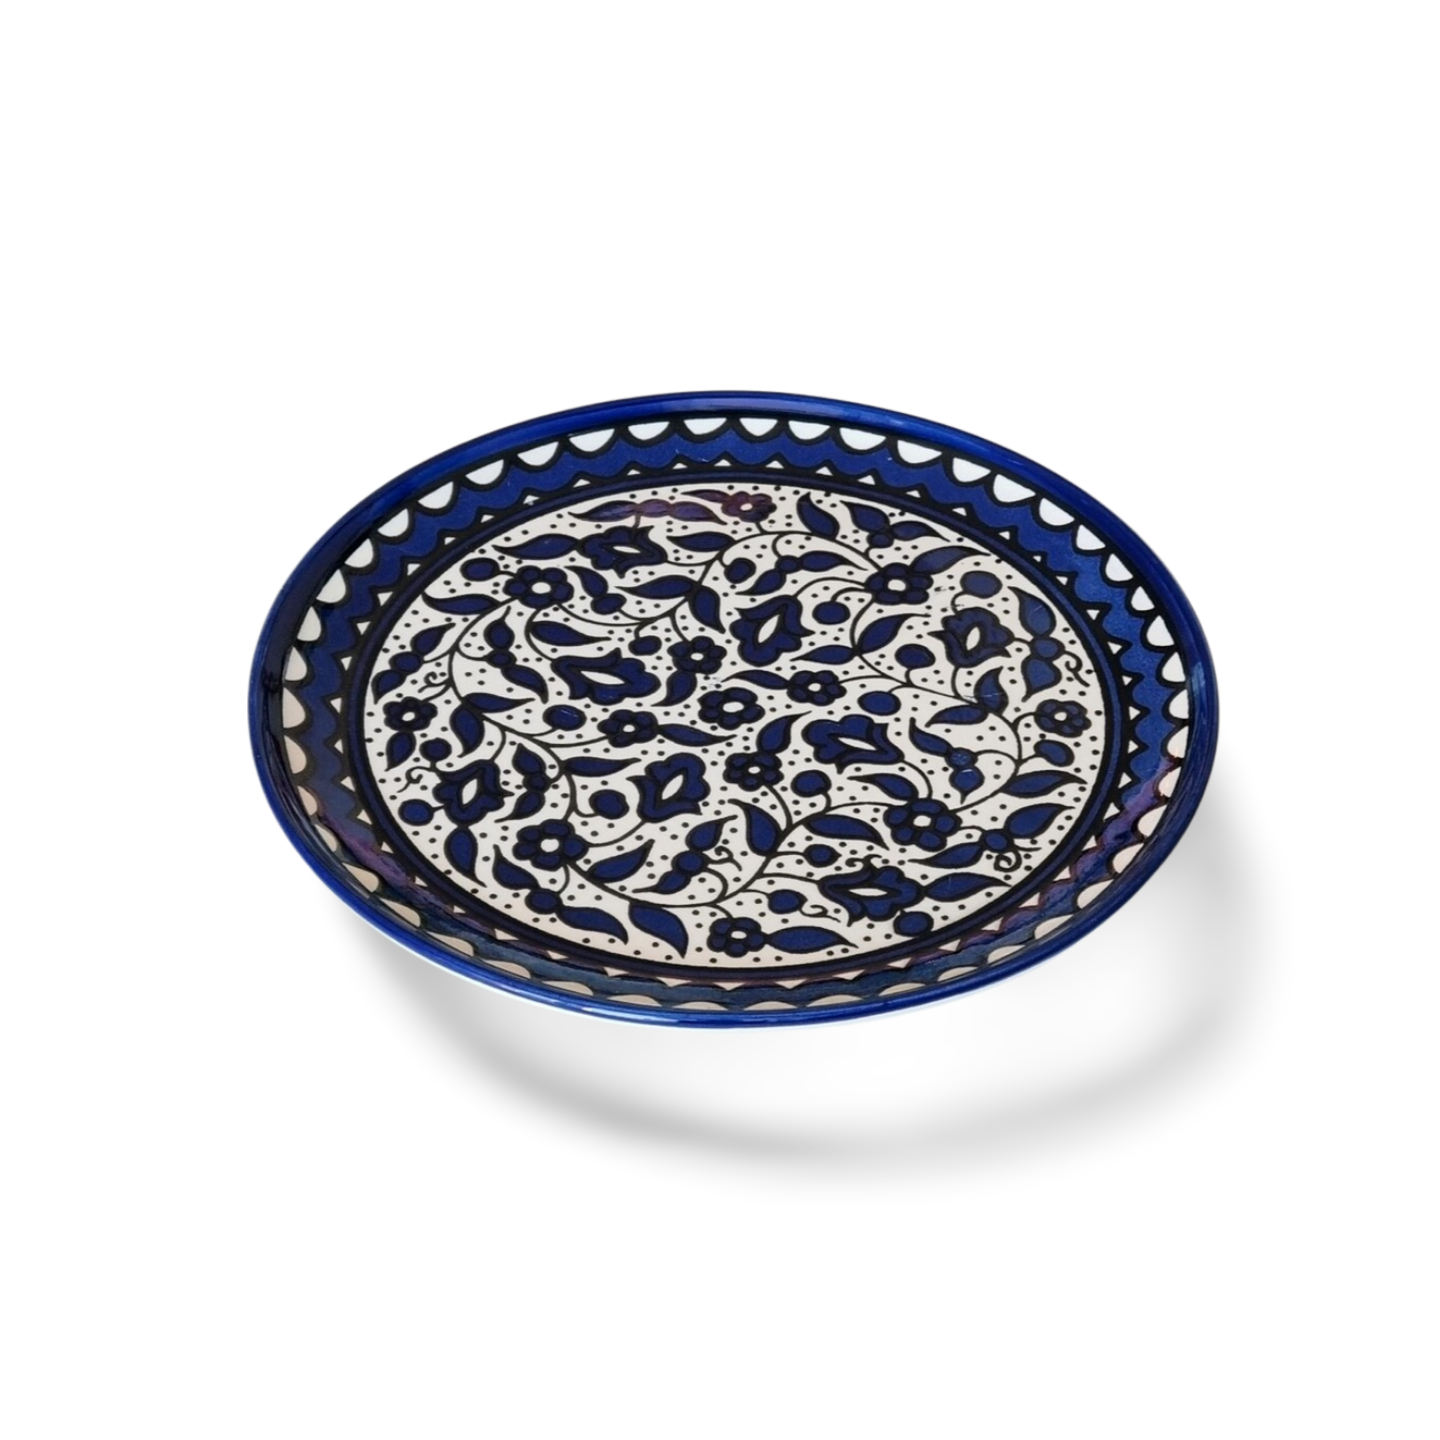 Blue and white Large Dinner Plate